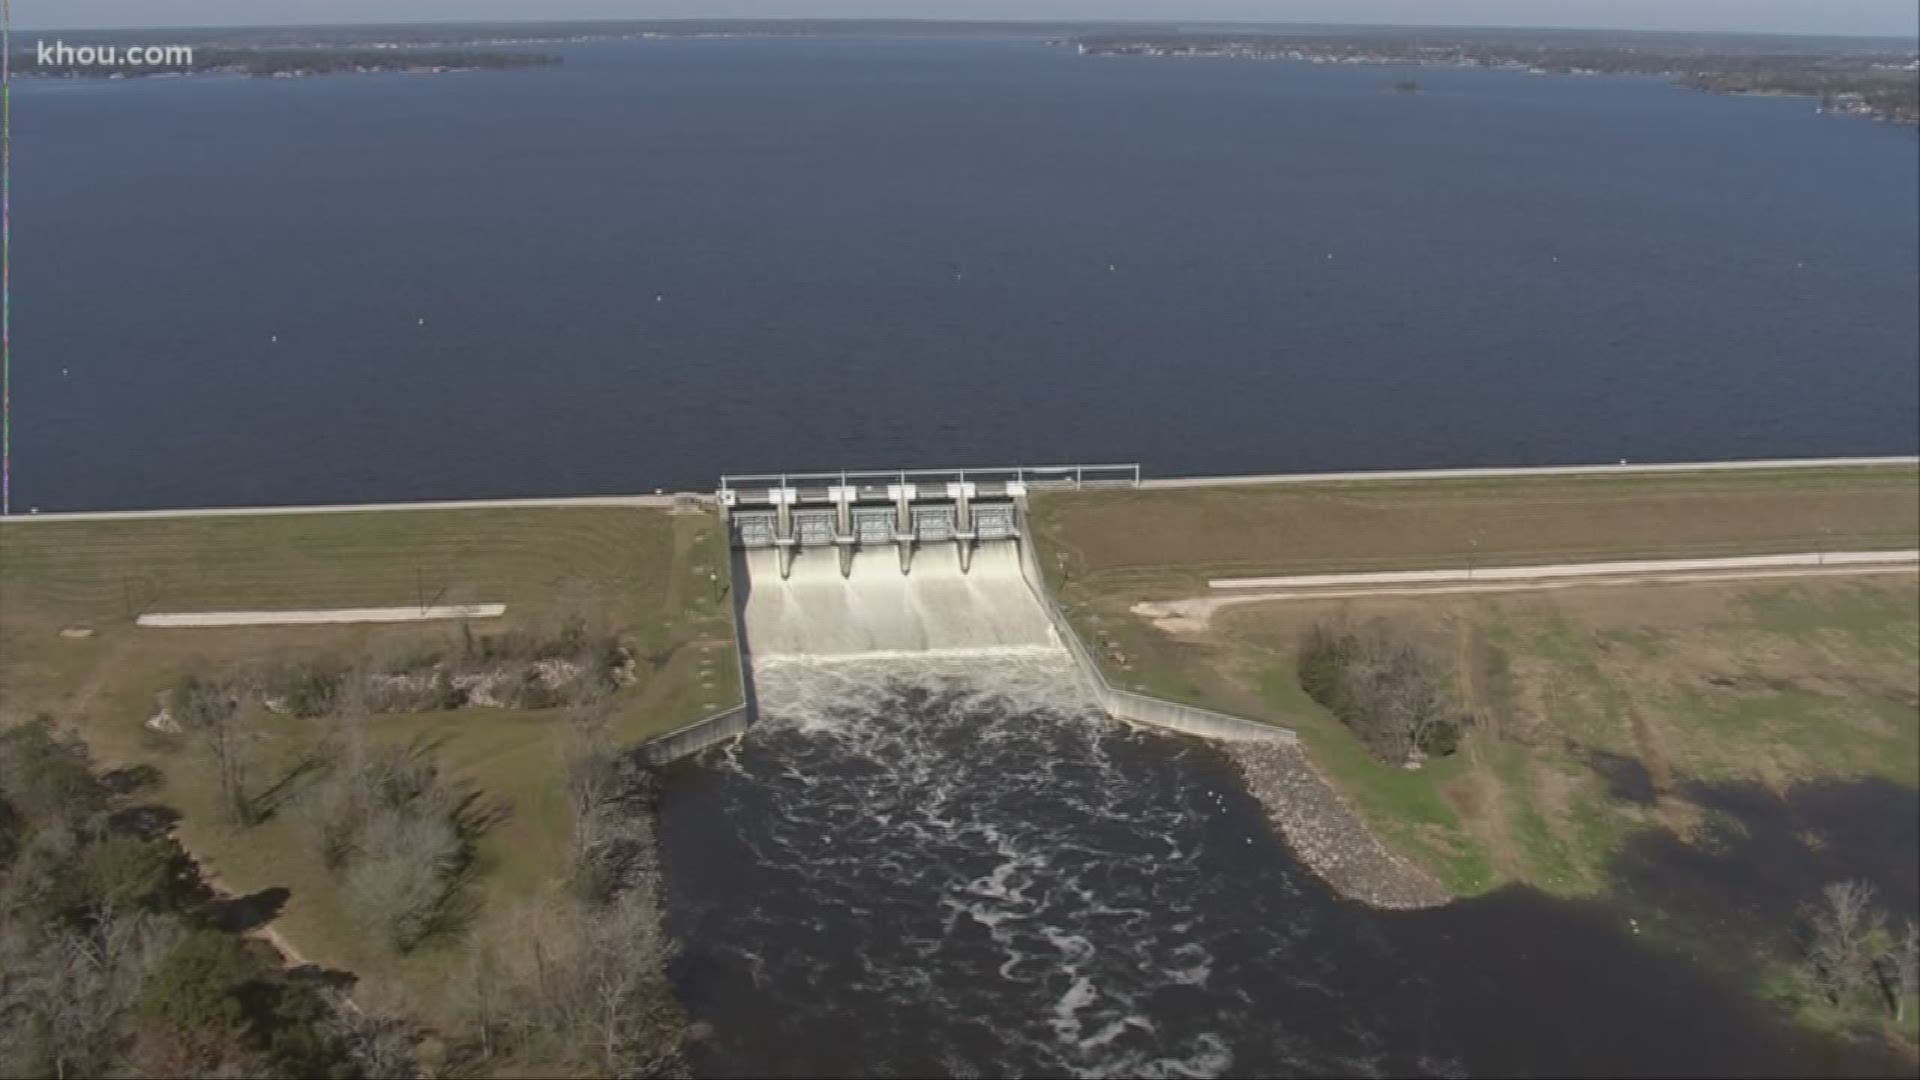 Lake Conroe has reopened after it saw more than 4 inches of rain in 36 hours over the weekend.